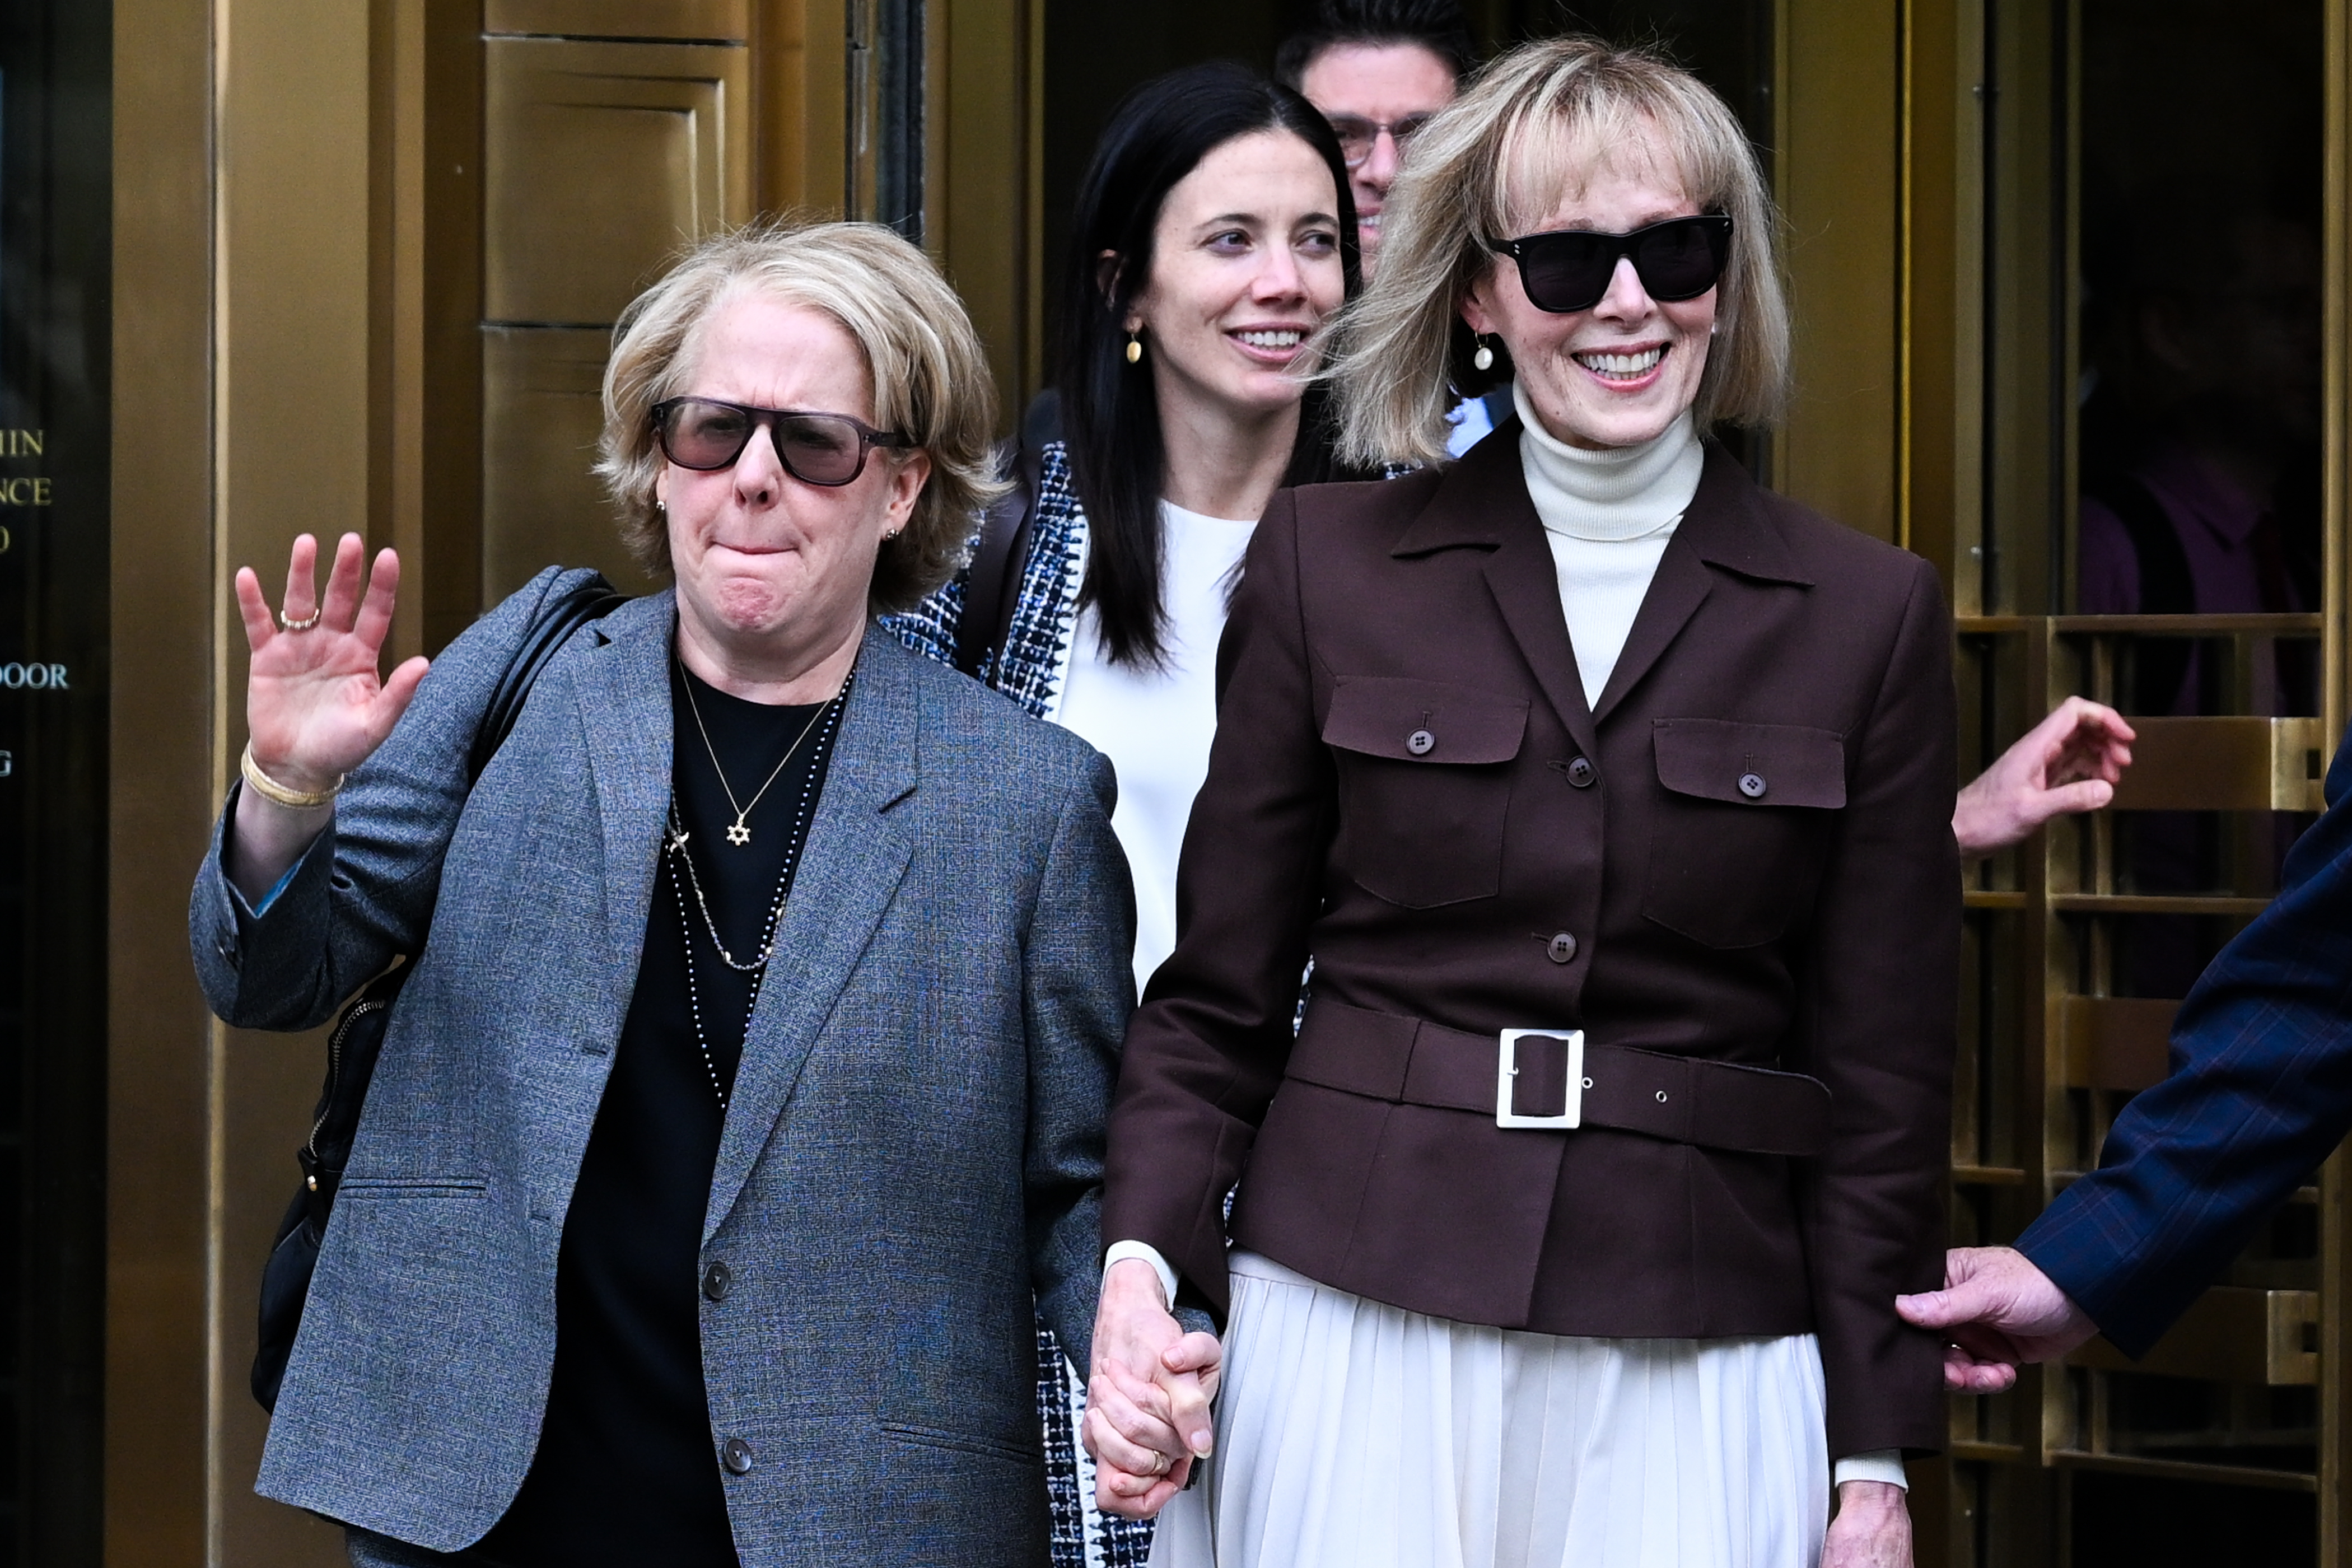 E. Jean Carroll leaves a courtroom after her civil trial against Donald Trump